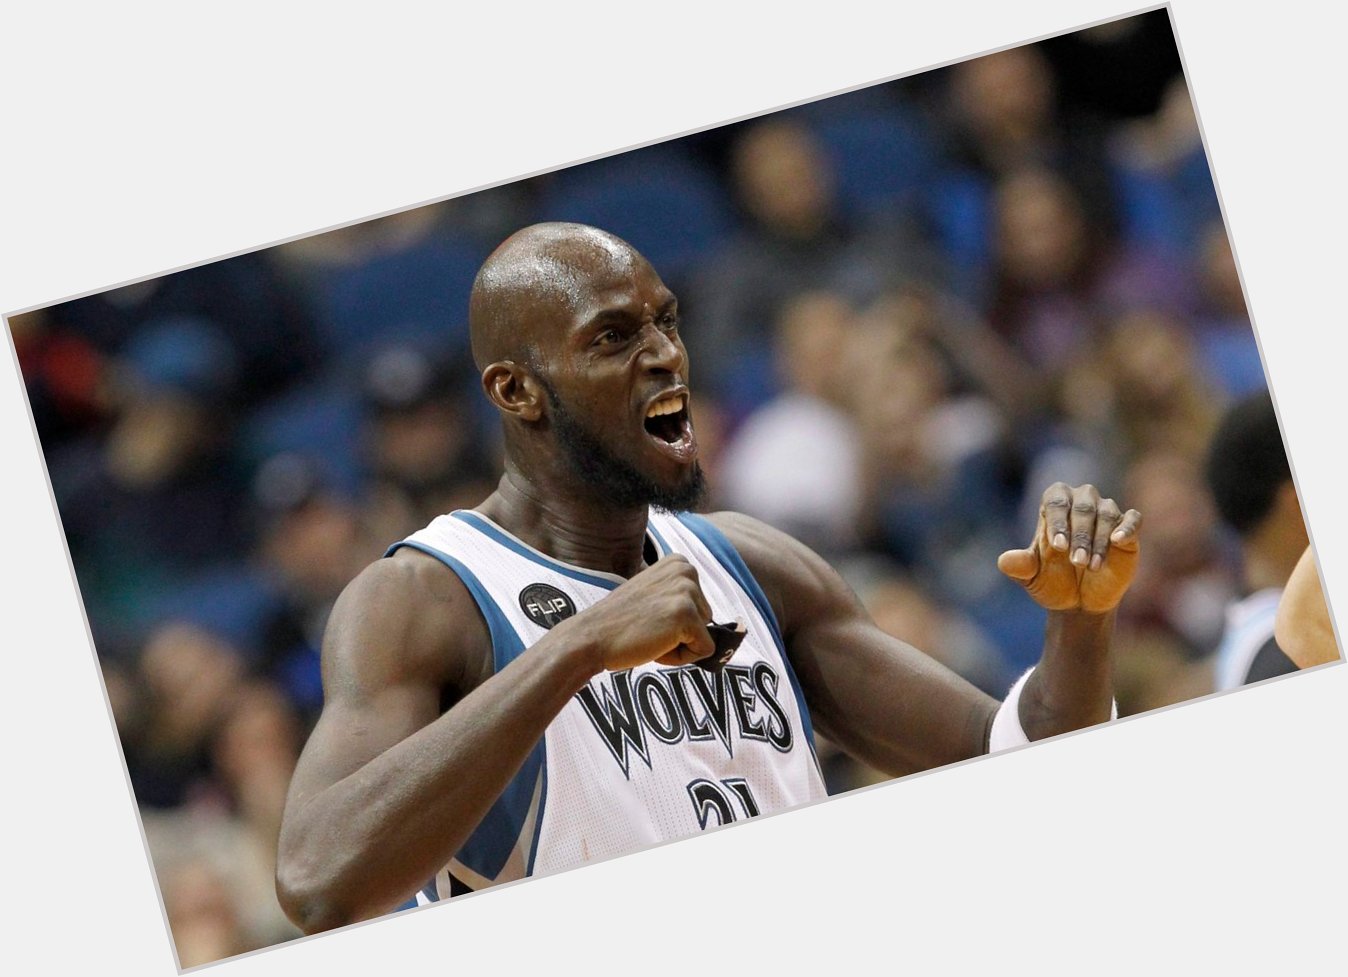 Happy 44th Birthday Kevin Garnett! He is credited with the most career defensive rebounds with 11,453. 